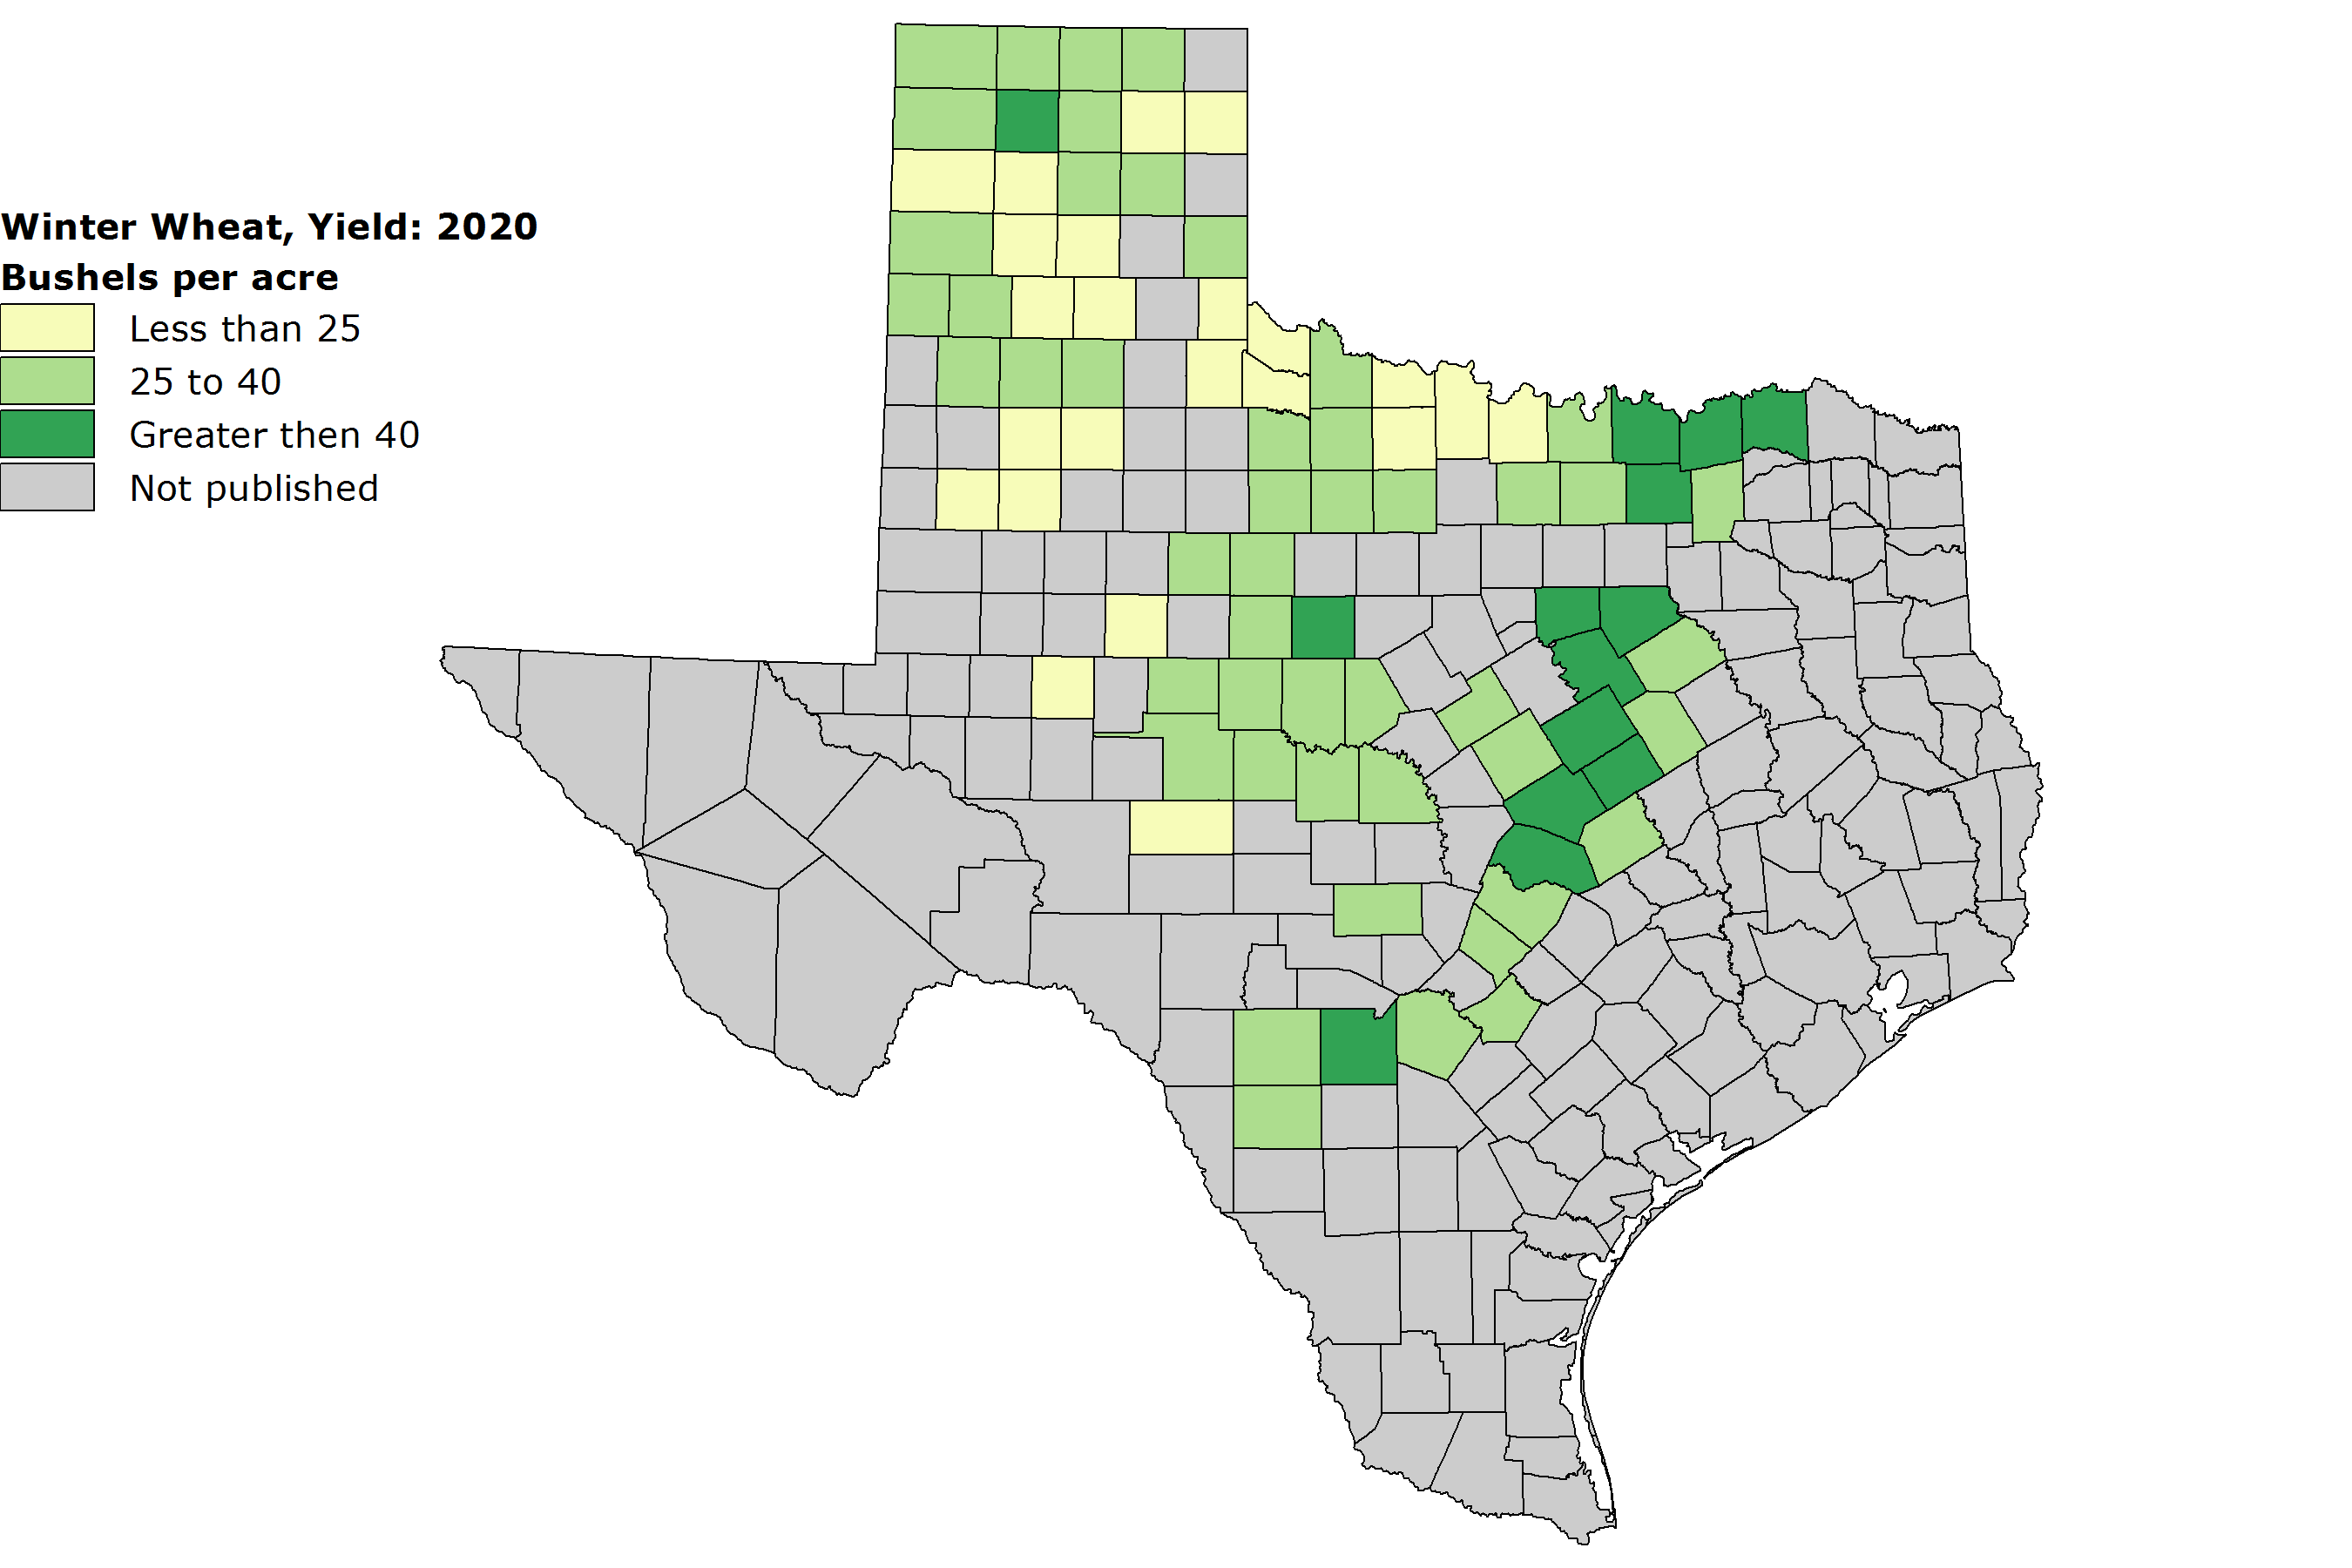 A shaded map of Texas showing the average yield of winter wheat bushels per acre.